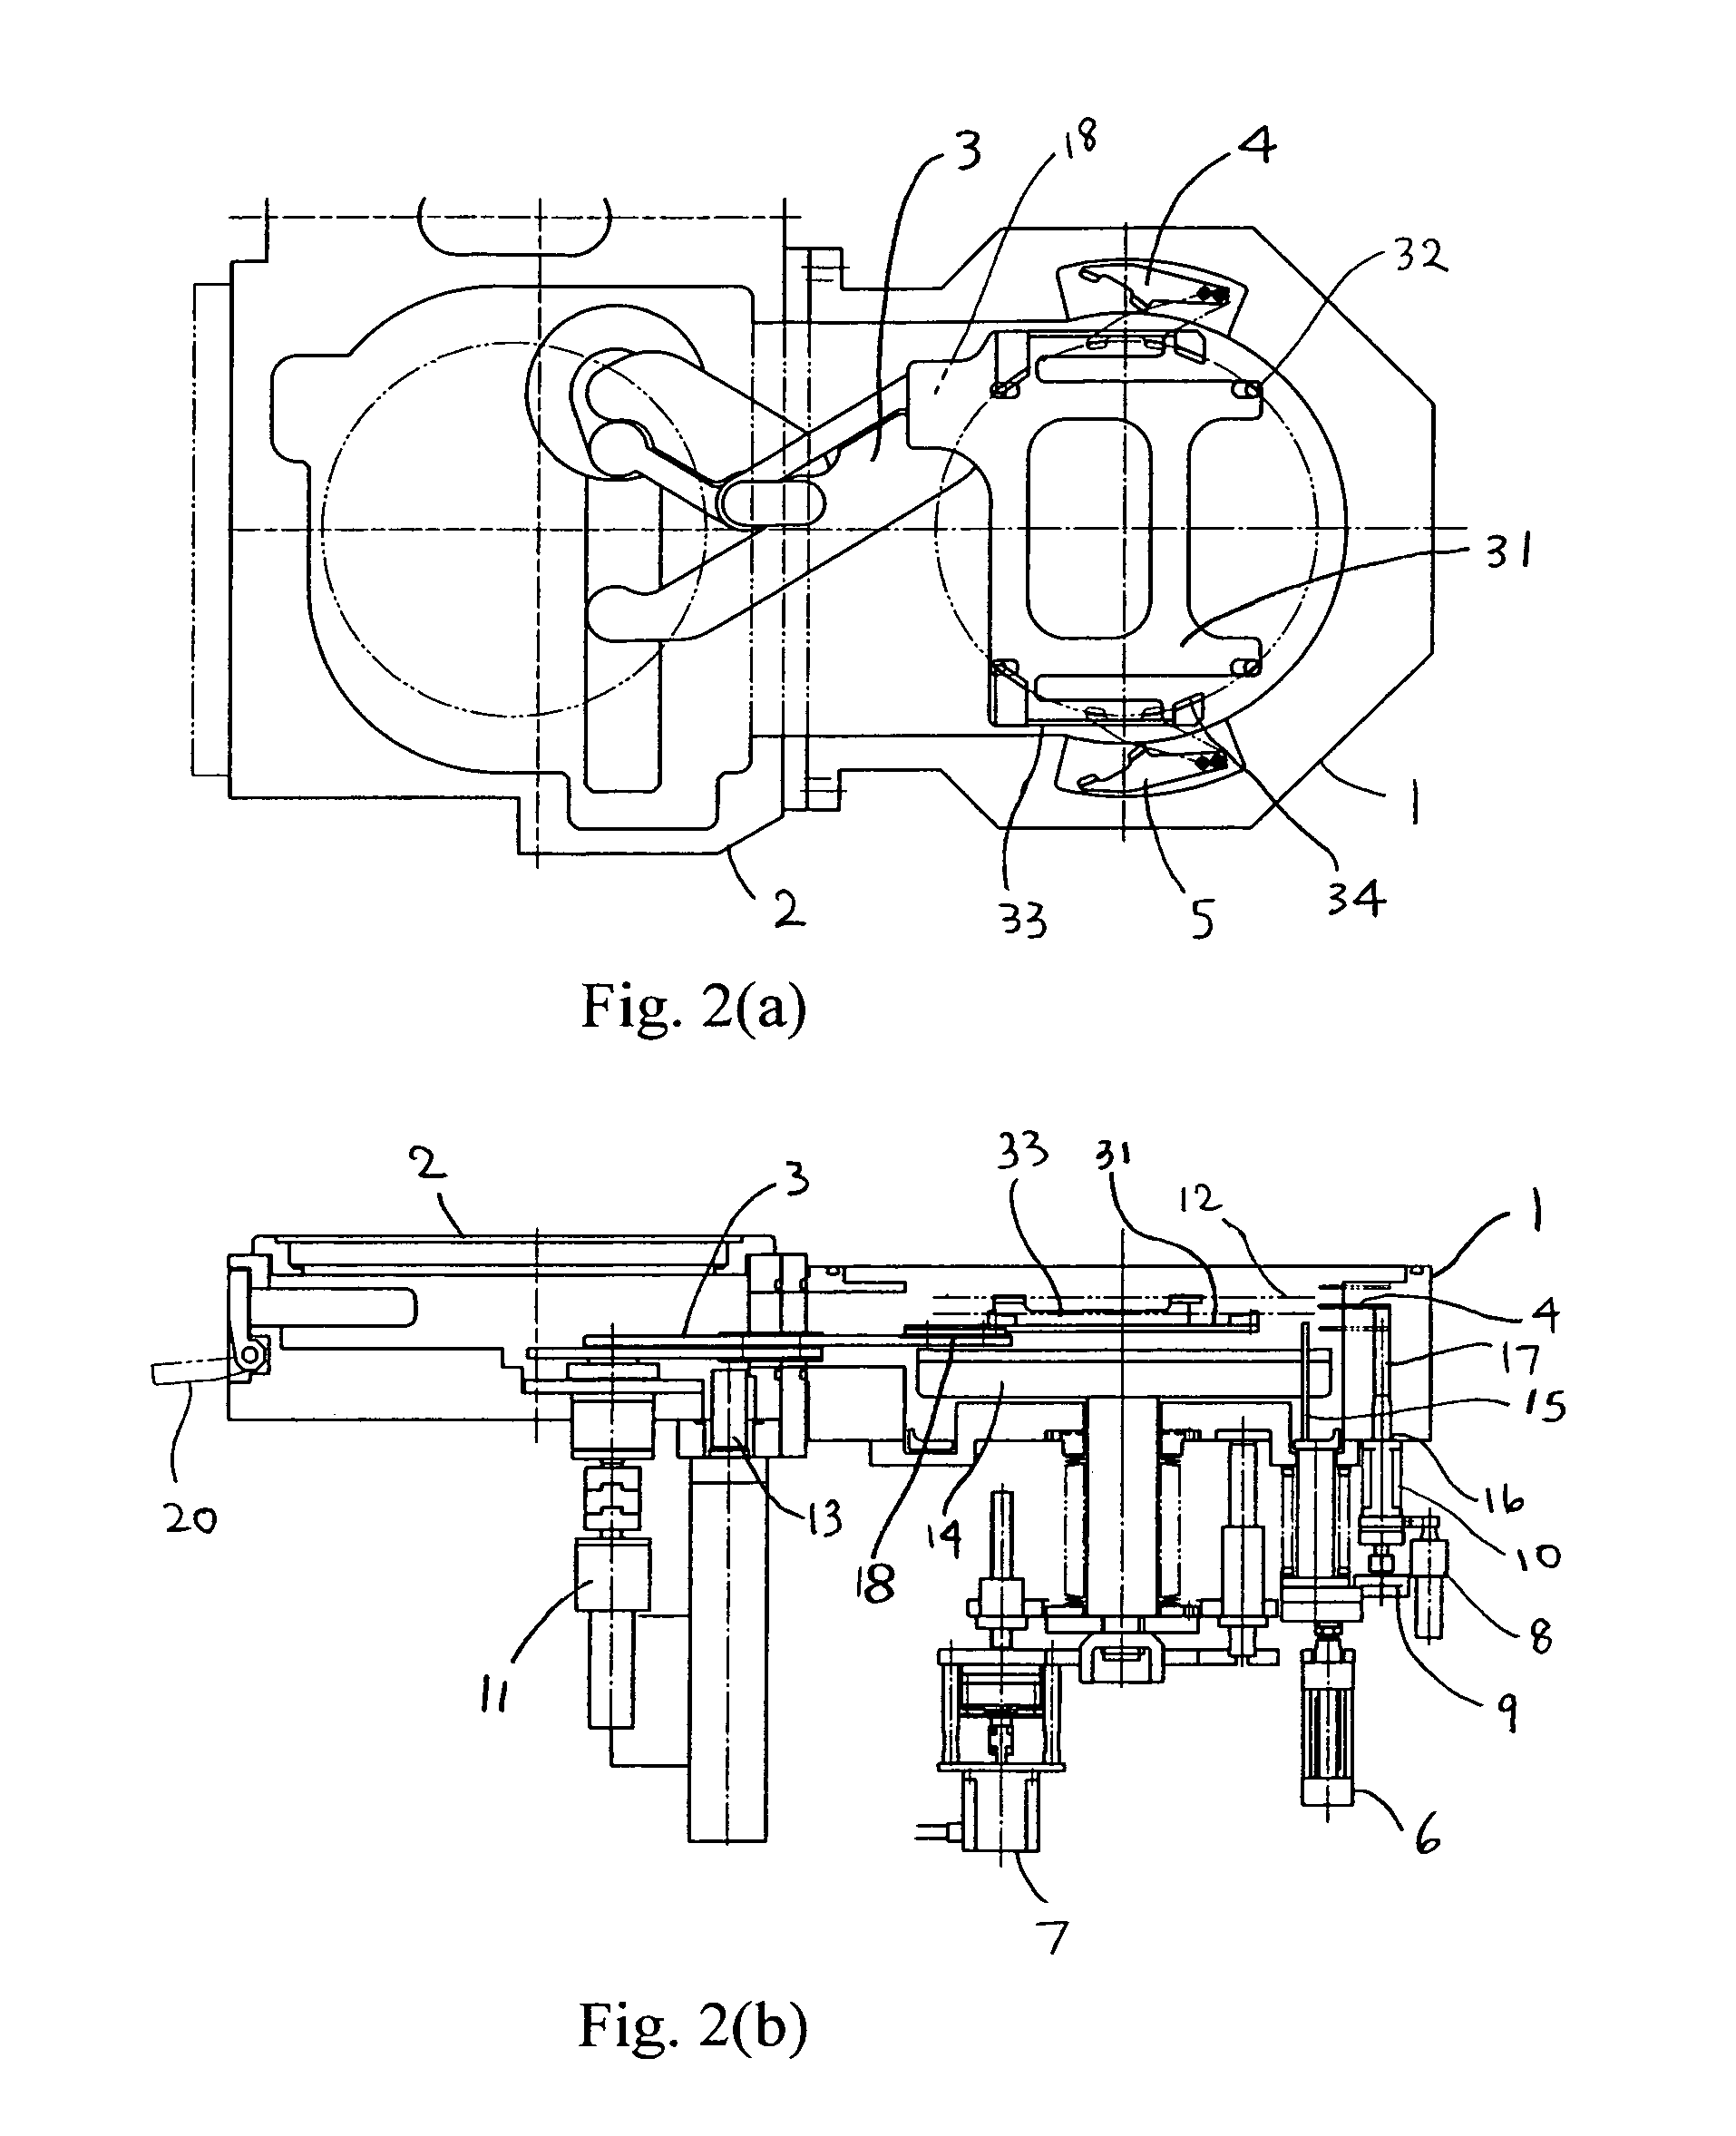 Substrate-processing apparatus with buffer mechanism and substrate-transferring apparatus